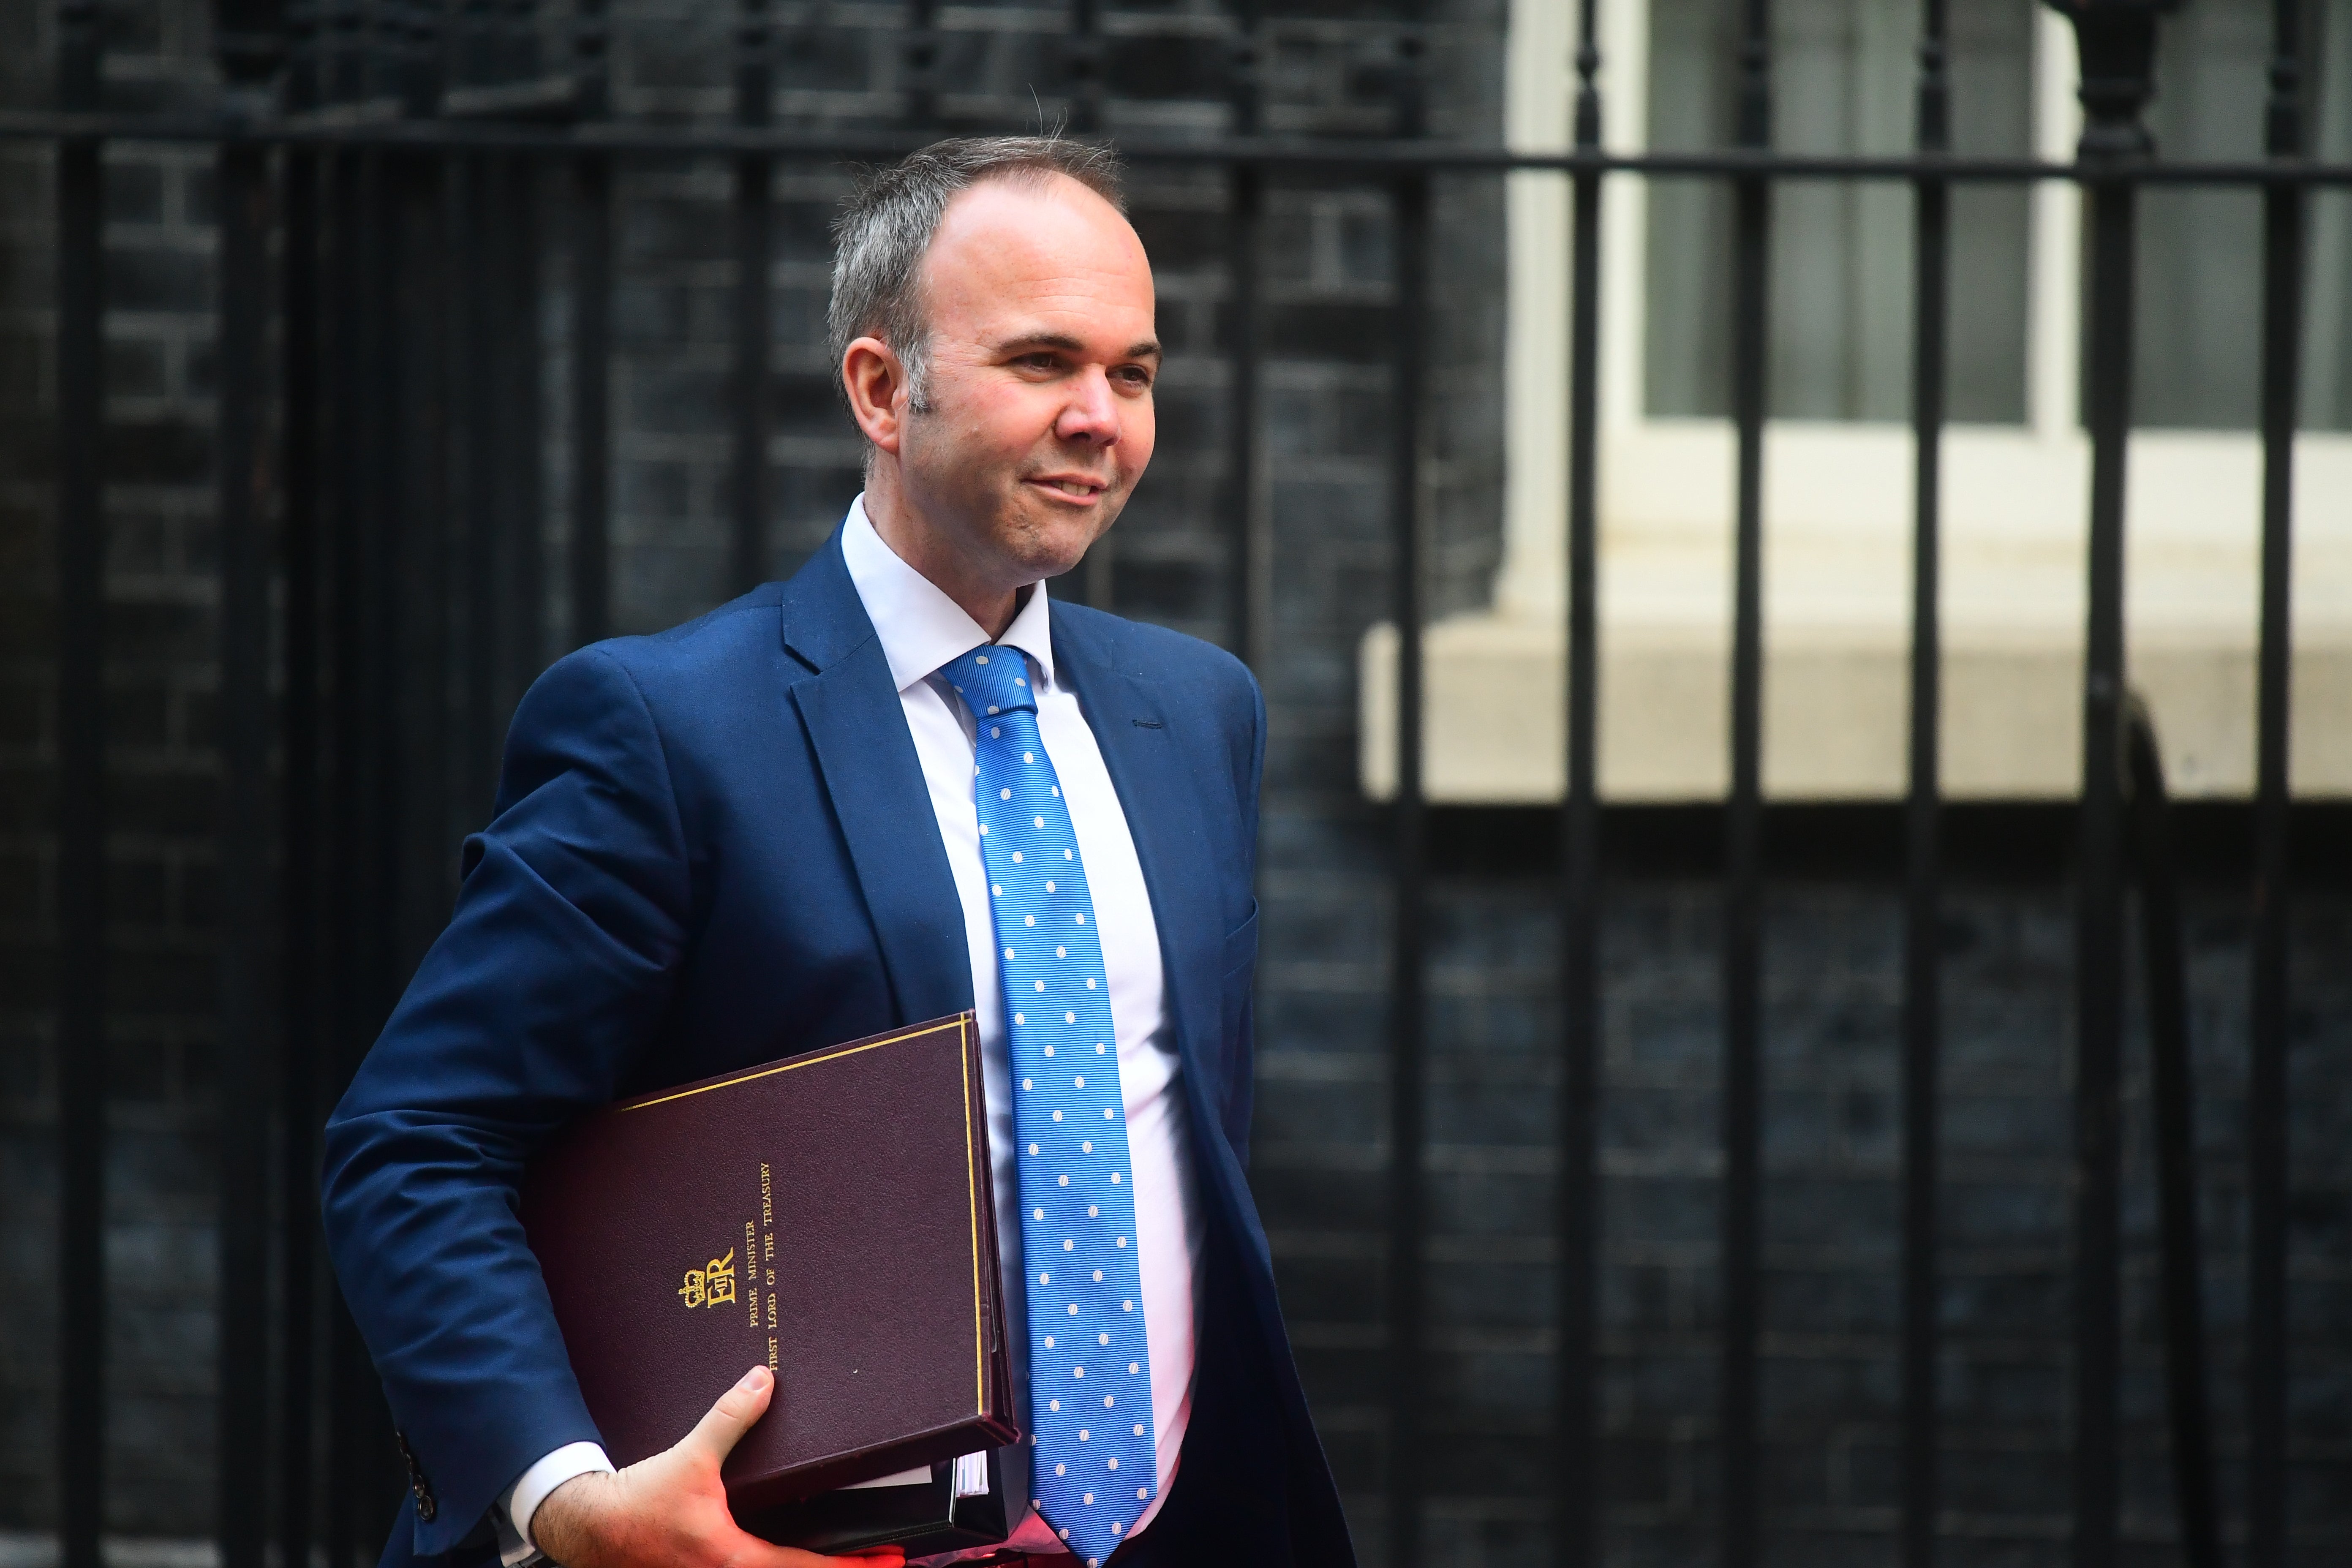 Gavin Barwell said the Savile comment had been a ‘stupid thing for the Prime Minister to do’ (PA)